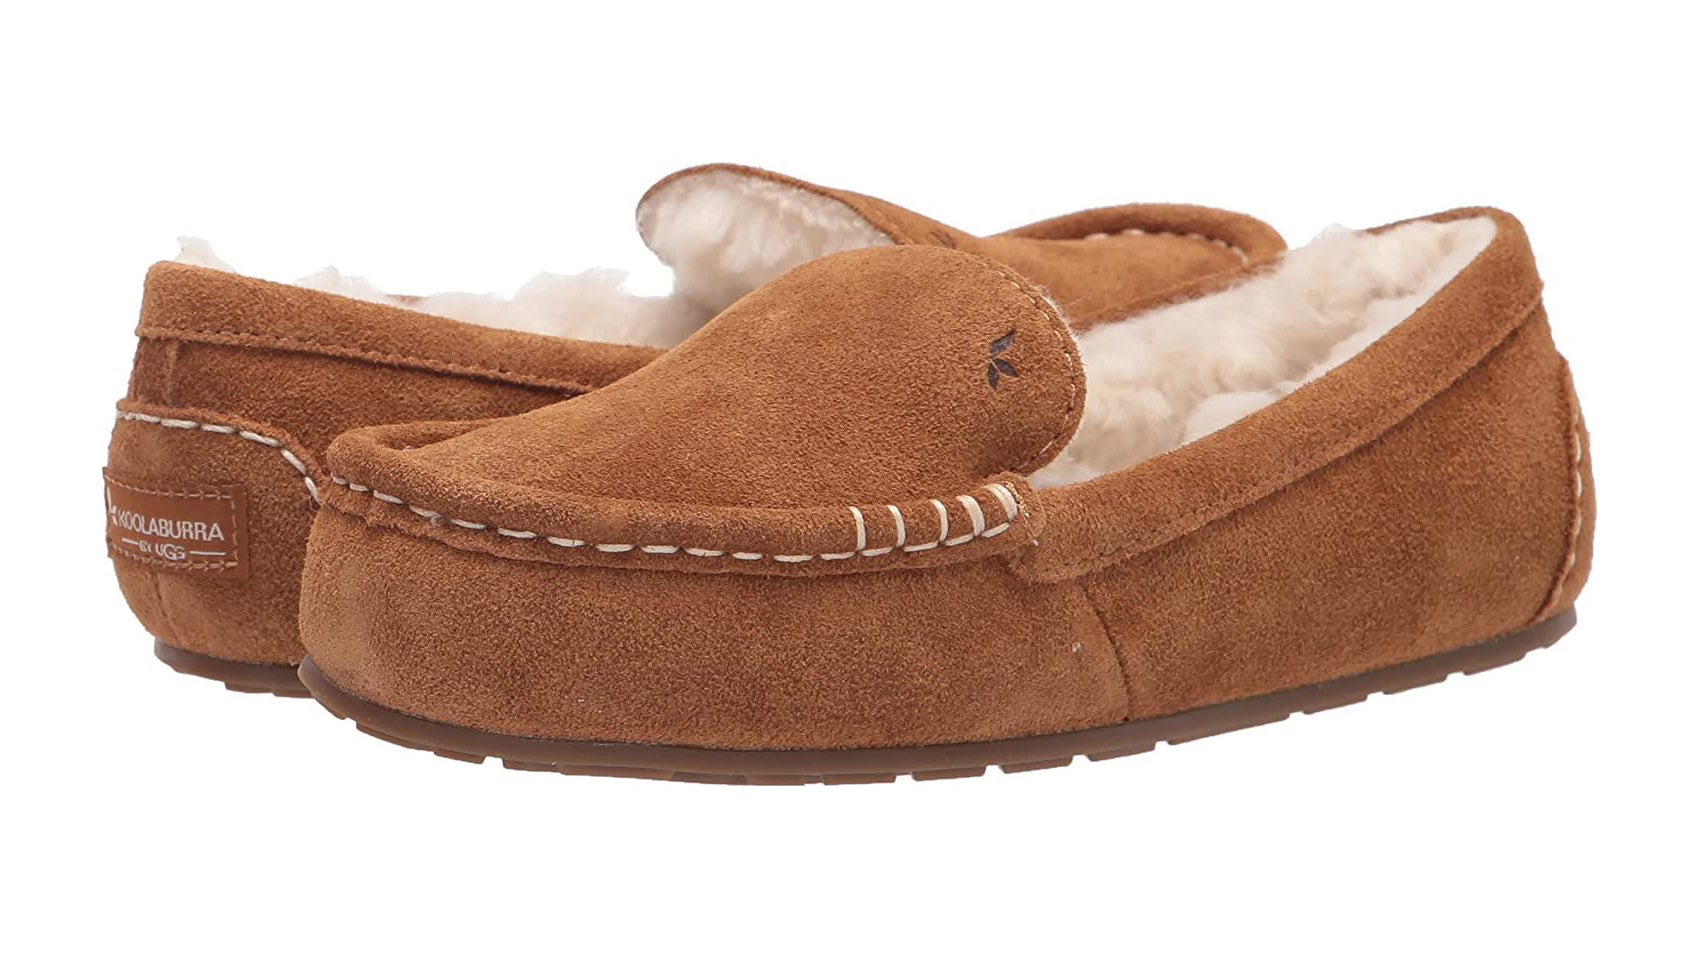 The Koolaburra by Ugg women&#x27;s Lezly slipper in brown with white sheep fur on the inside